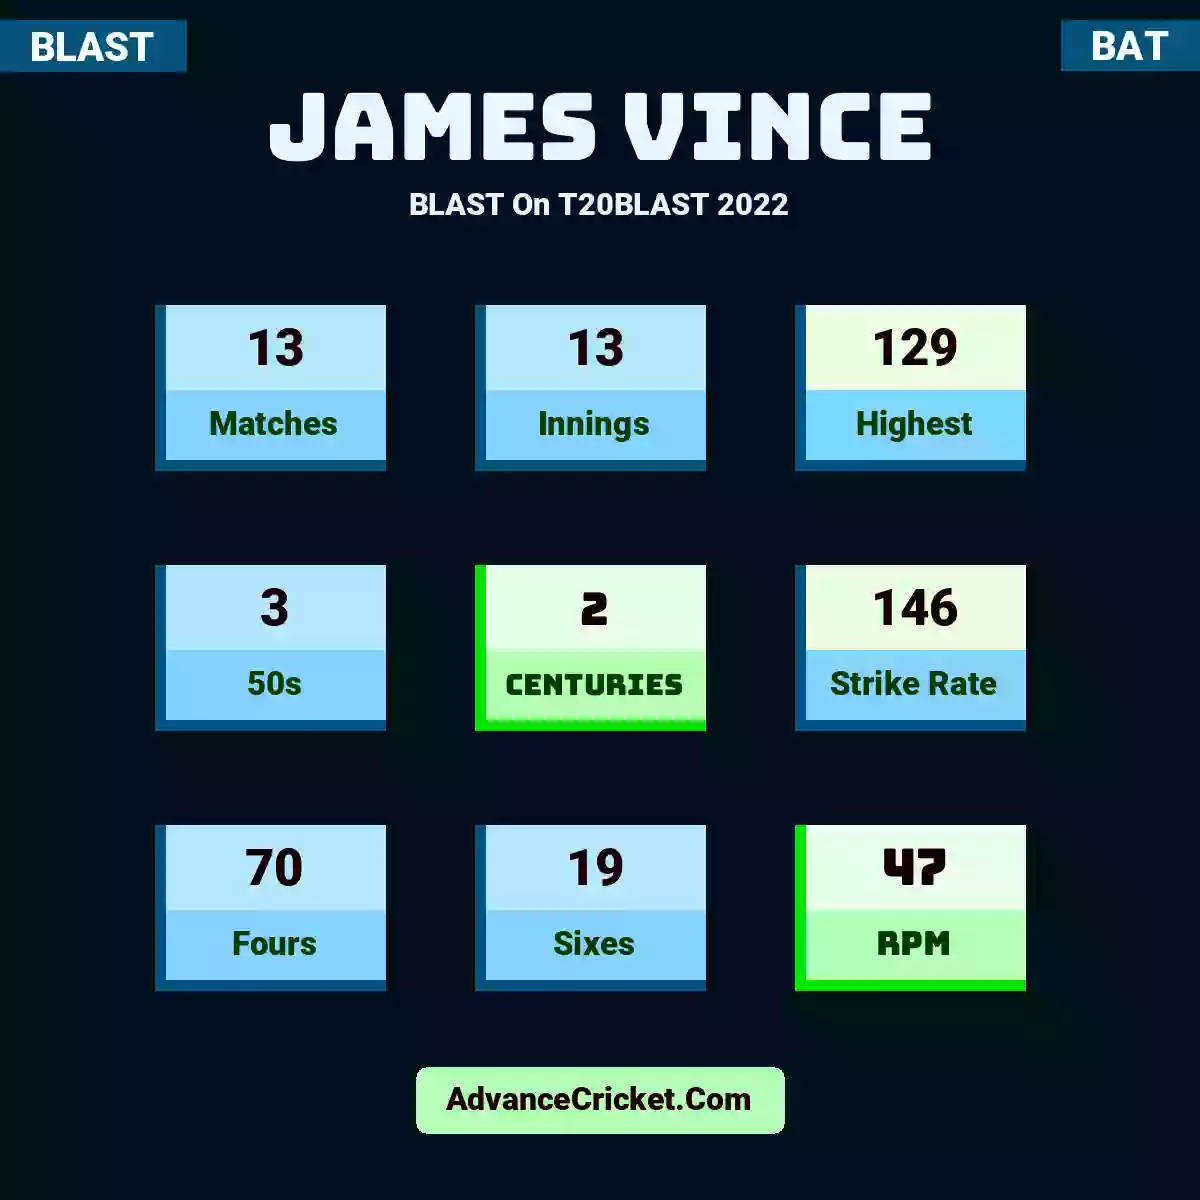 James Vince BLAST  On T20BLAST 2022, James Vince played 13 matches, scored 129 runs as highest, 3 half-centuries, and 2 centuries, with a strike rate of 146. J.Vince hit 70 fours and 19 sixes, with an RPM of 47.